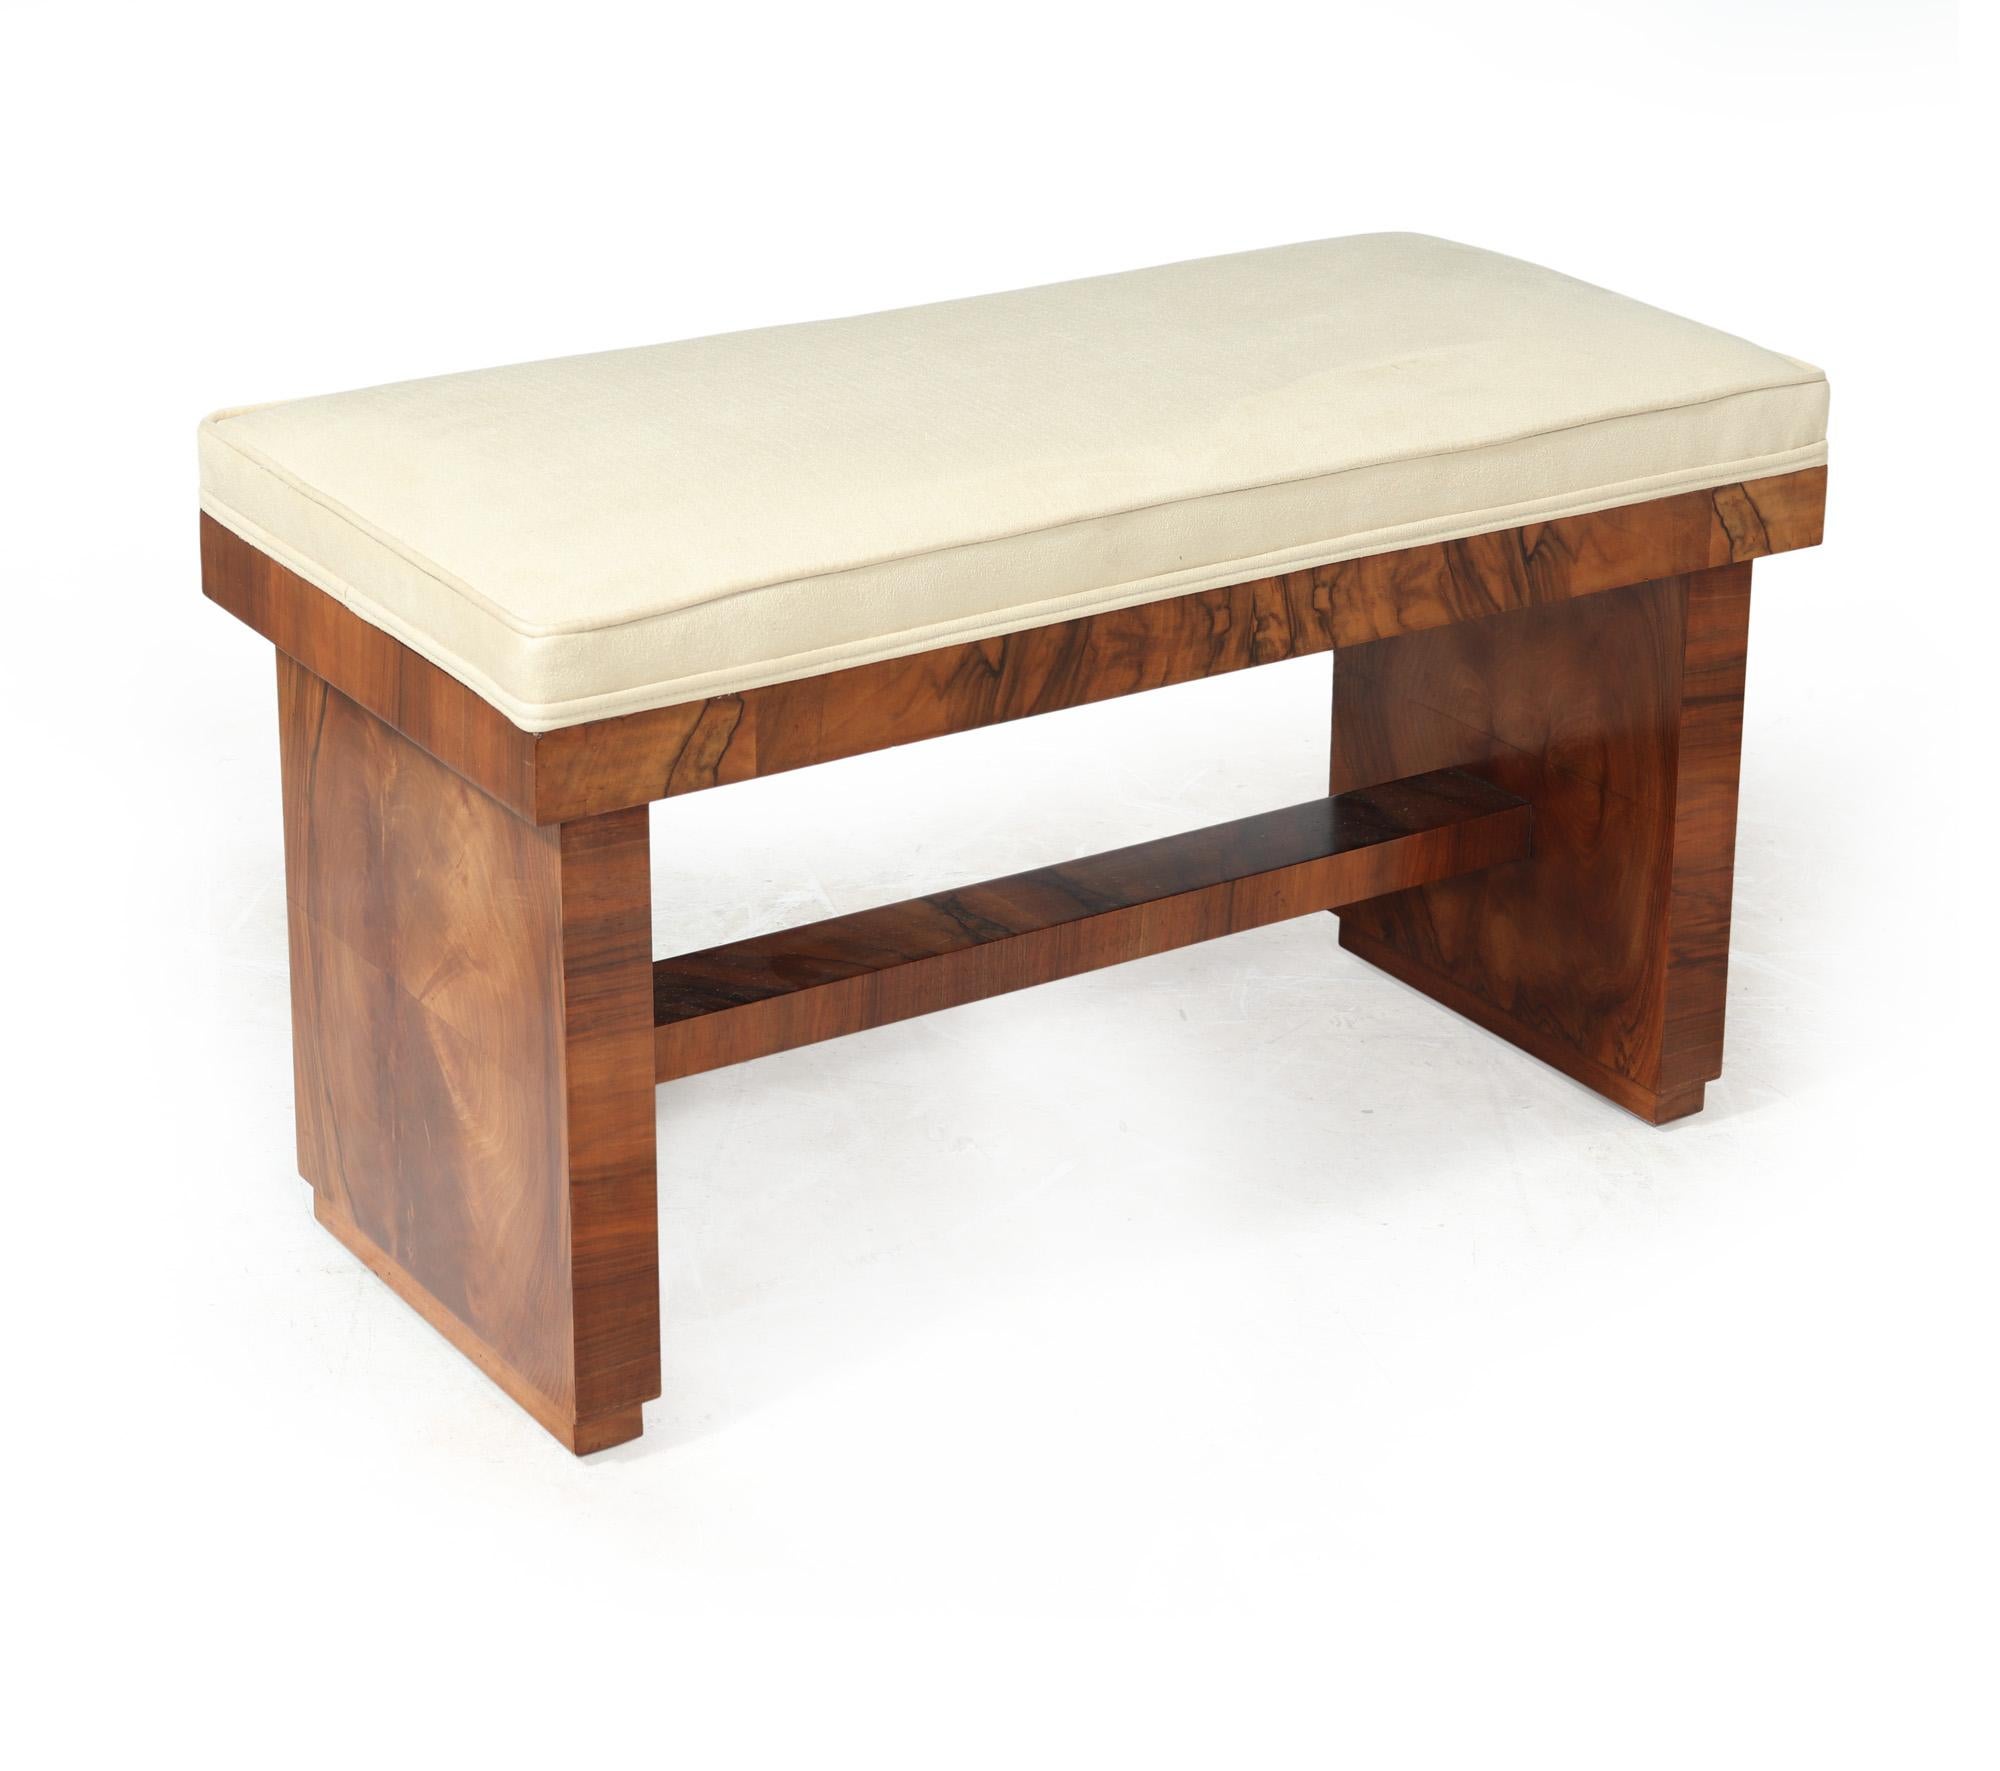 ART DECO WINDOW SEAT 
A lovely little two seat stool, would work as a window seat or at the foot of a bed produced in England in the 1930’s in figured walnut the stool has been fully upholstered with a faux suede stain resistant fabric. The stool